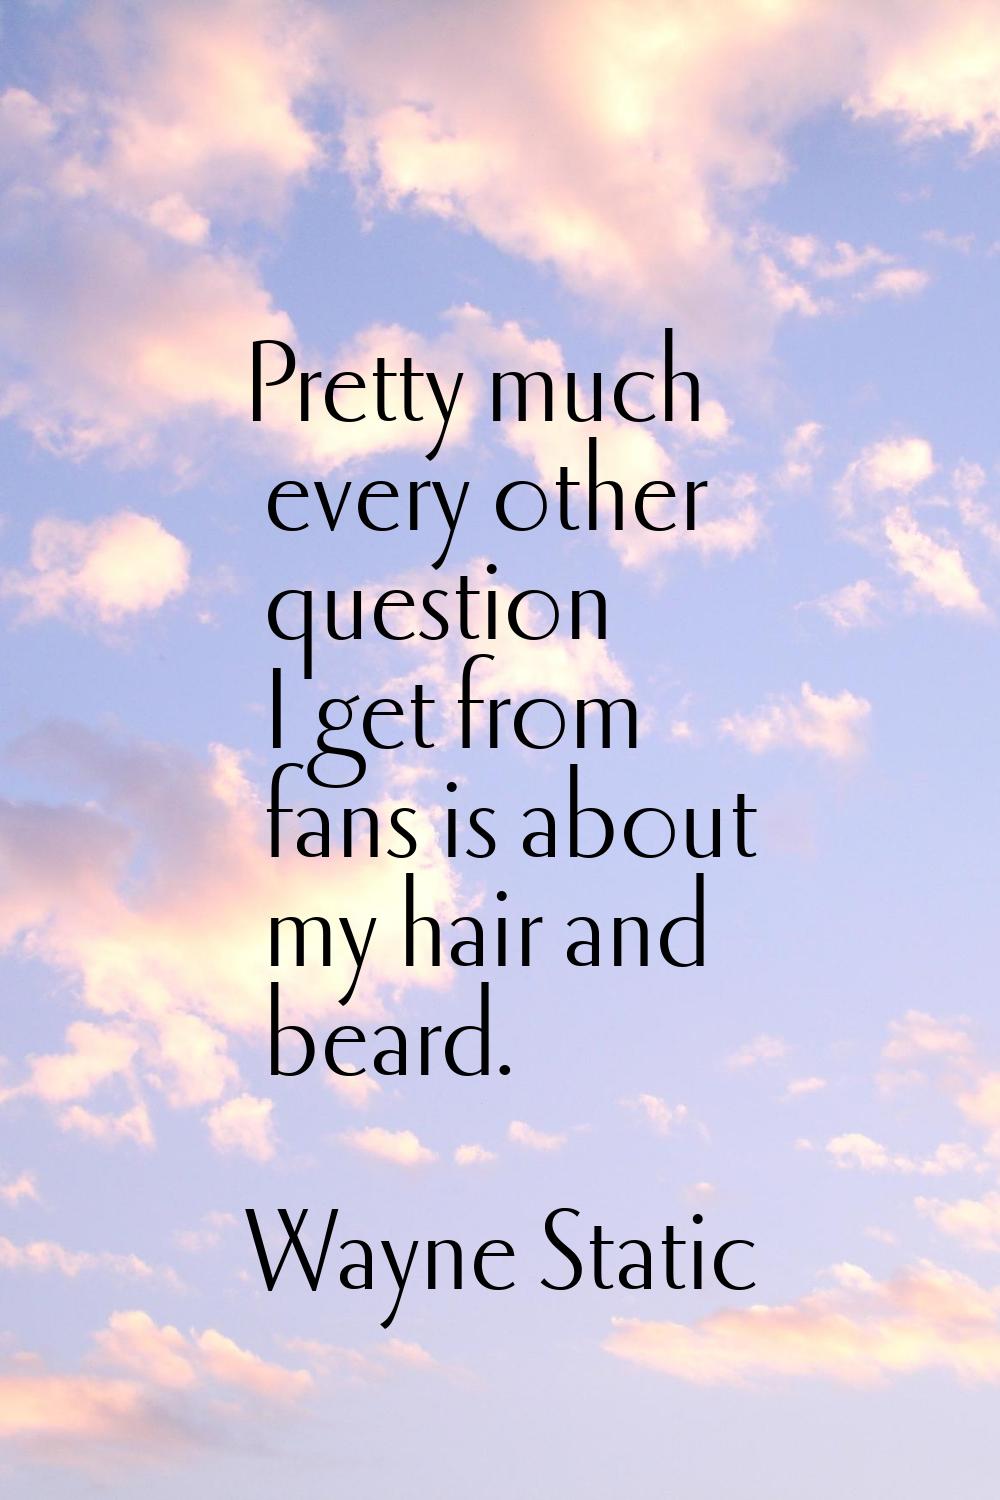 Pretty much every other question I get from fans is about my hair and beard.